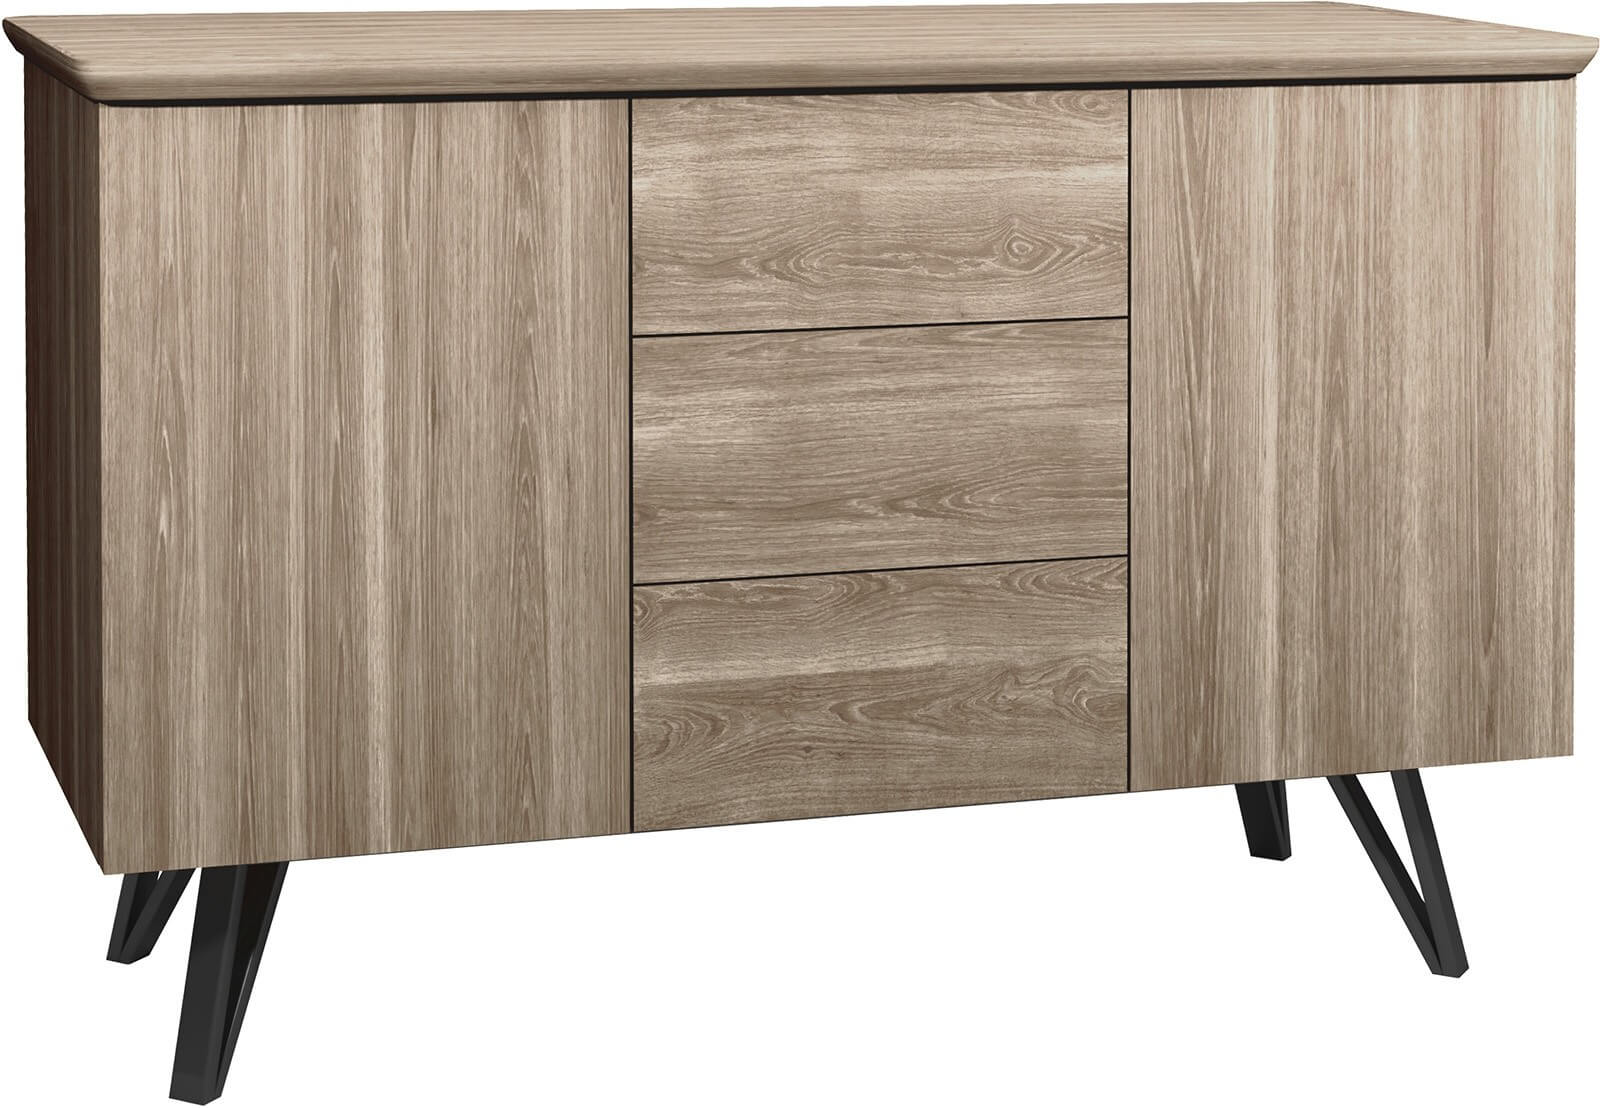 Showing image for Detroit sideboard - small